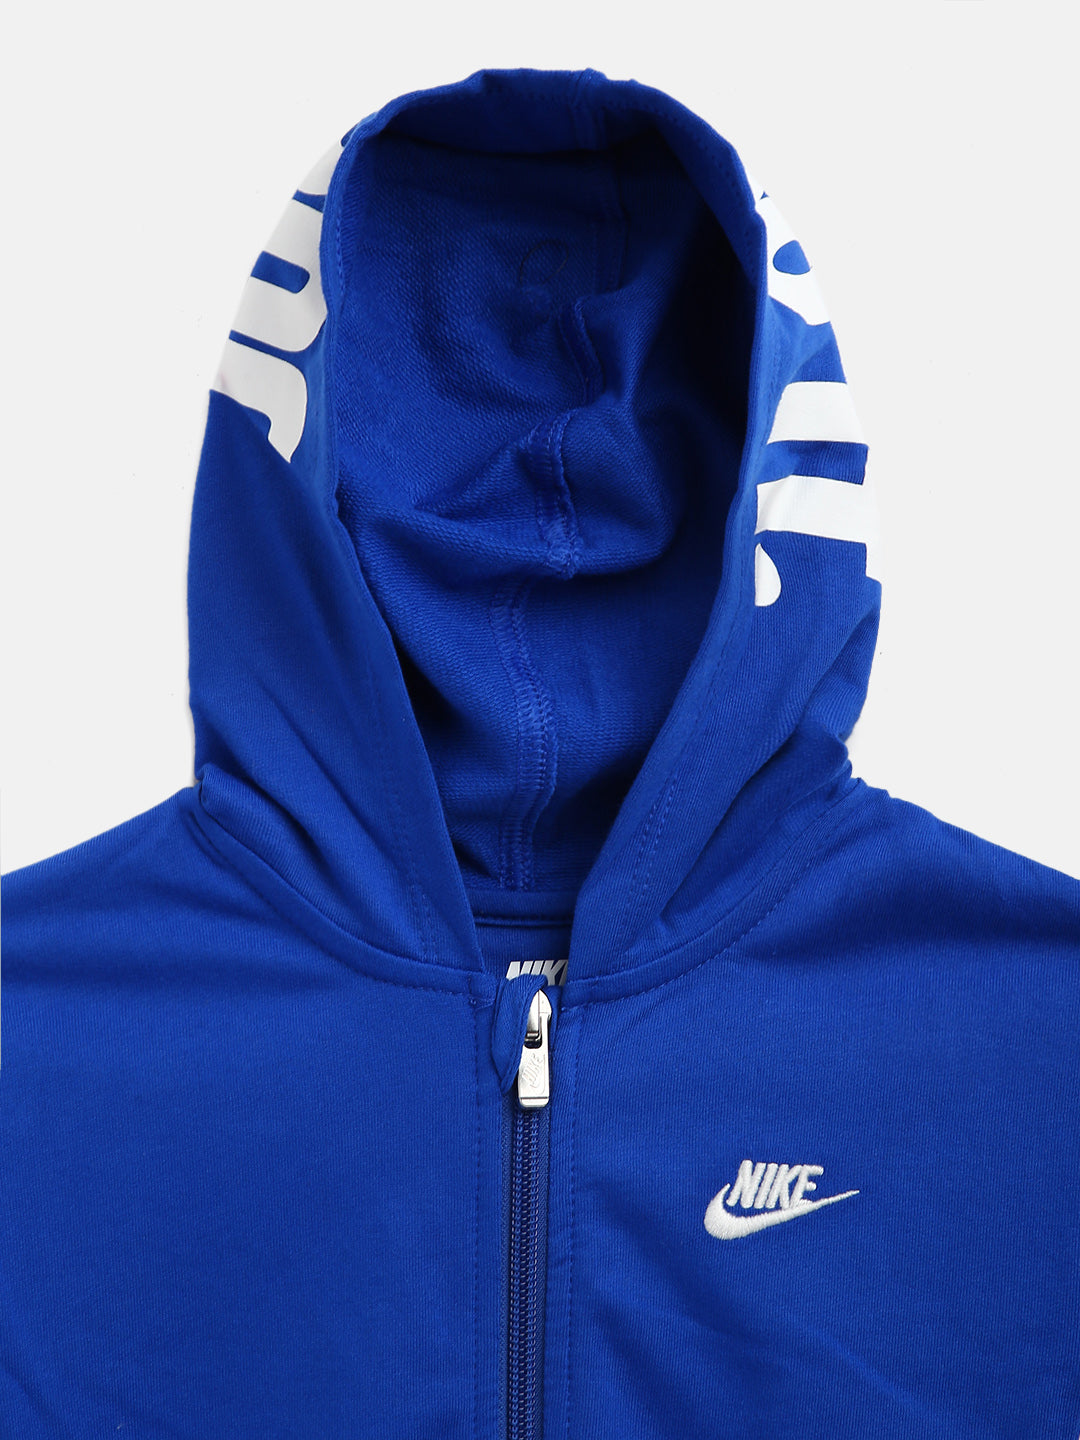 Nike Hooded French Terry Coveralls Bodysuit Nike   